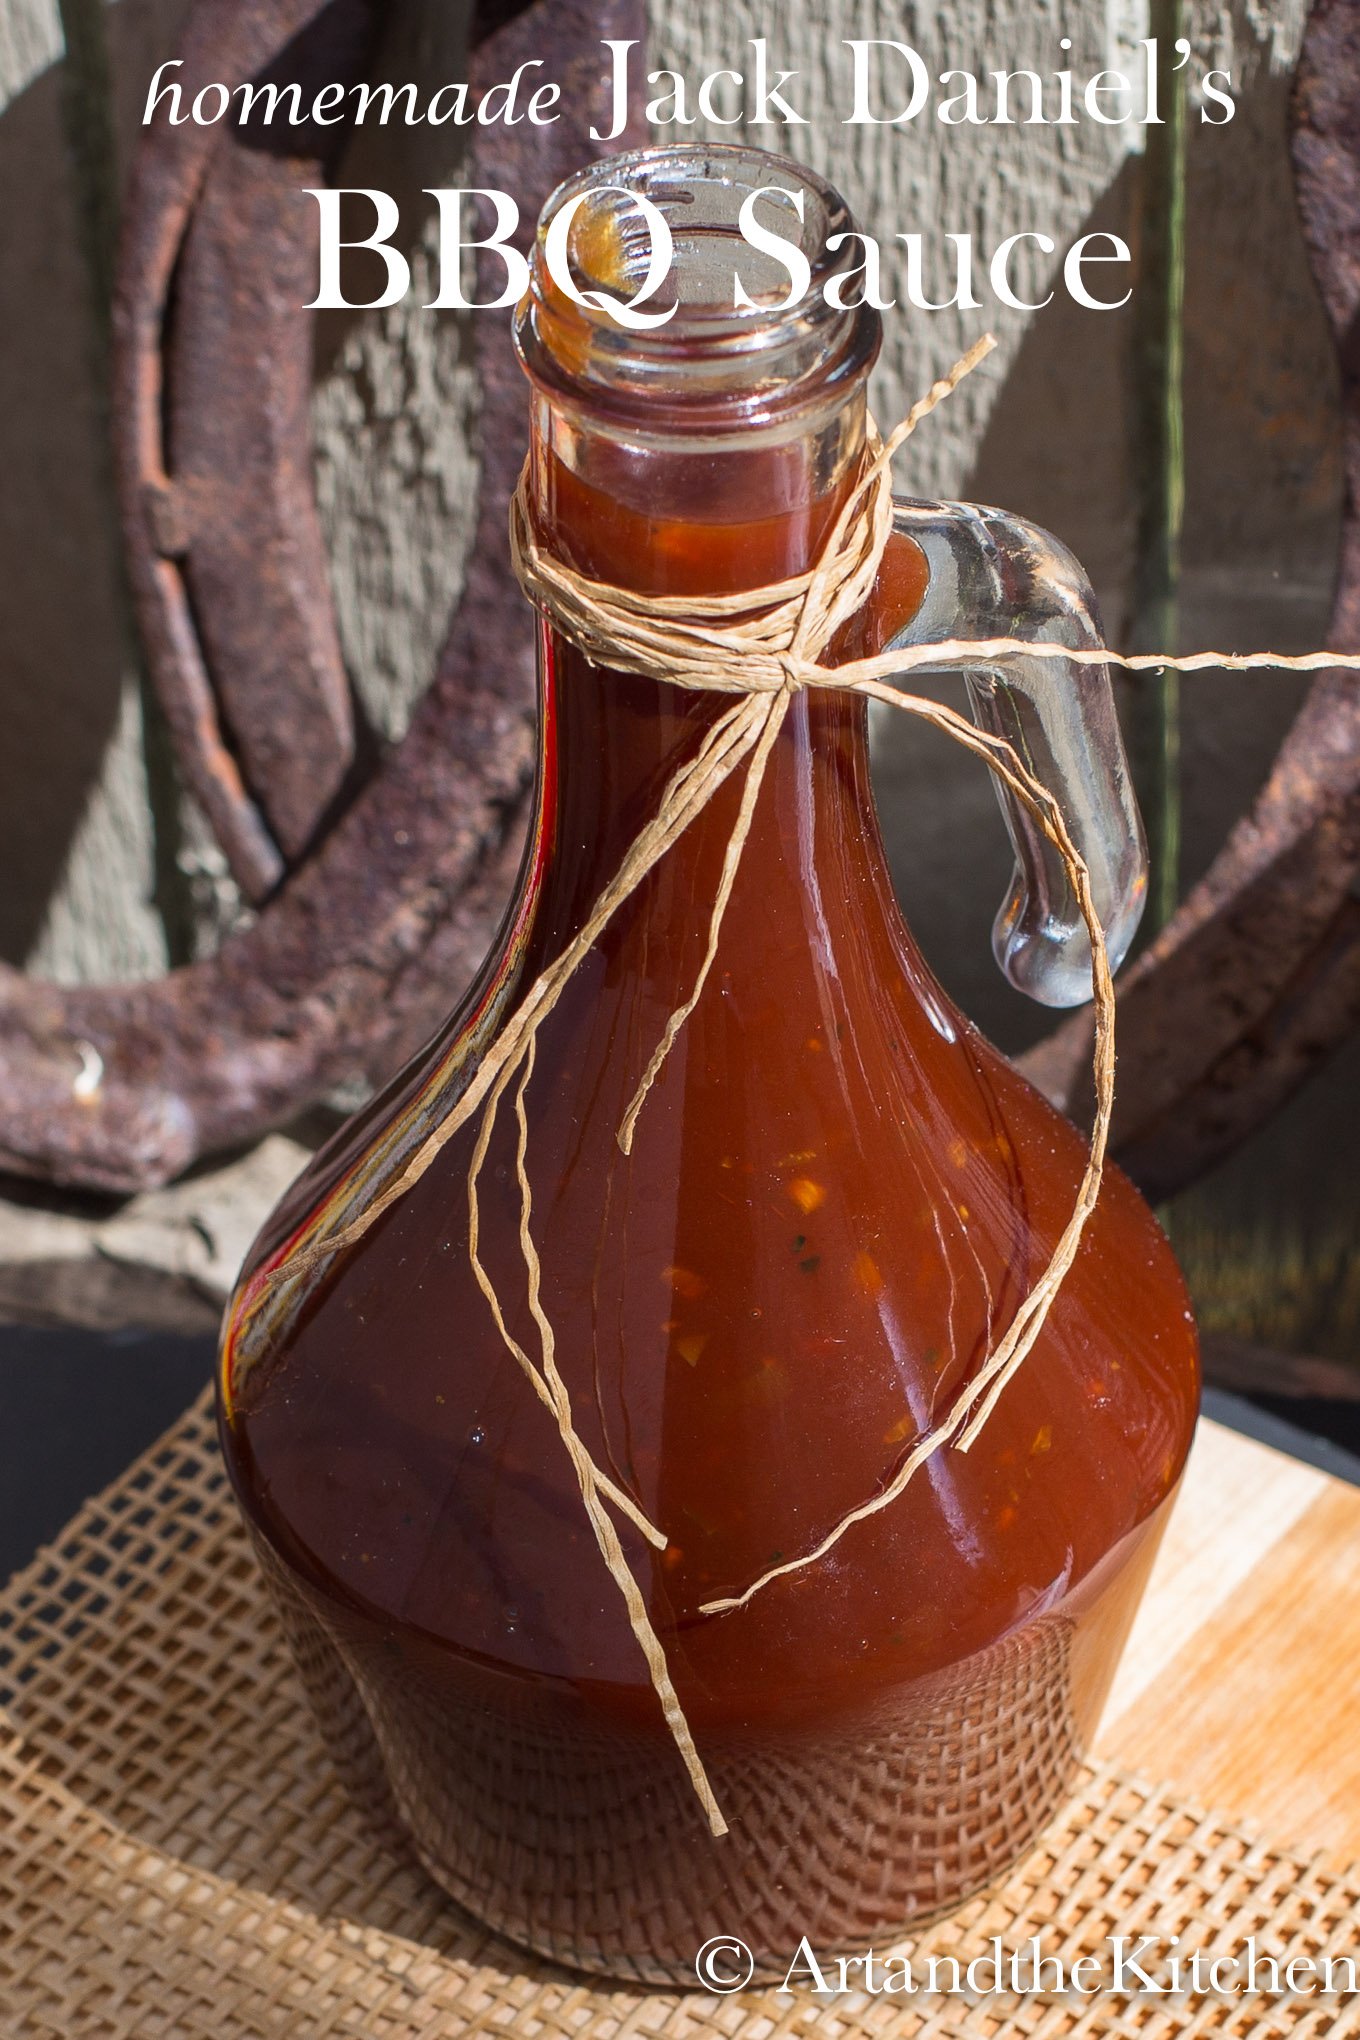 Decorative glass jar filled with homemade BBQ sauce.